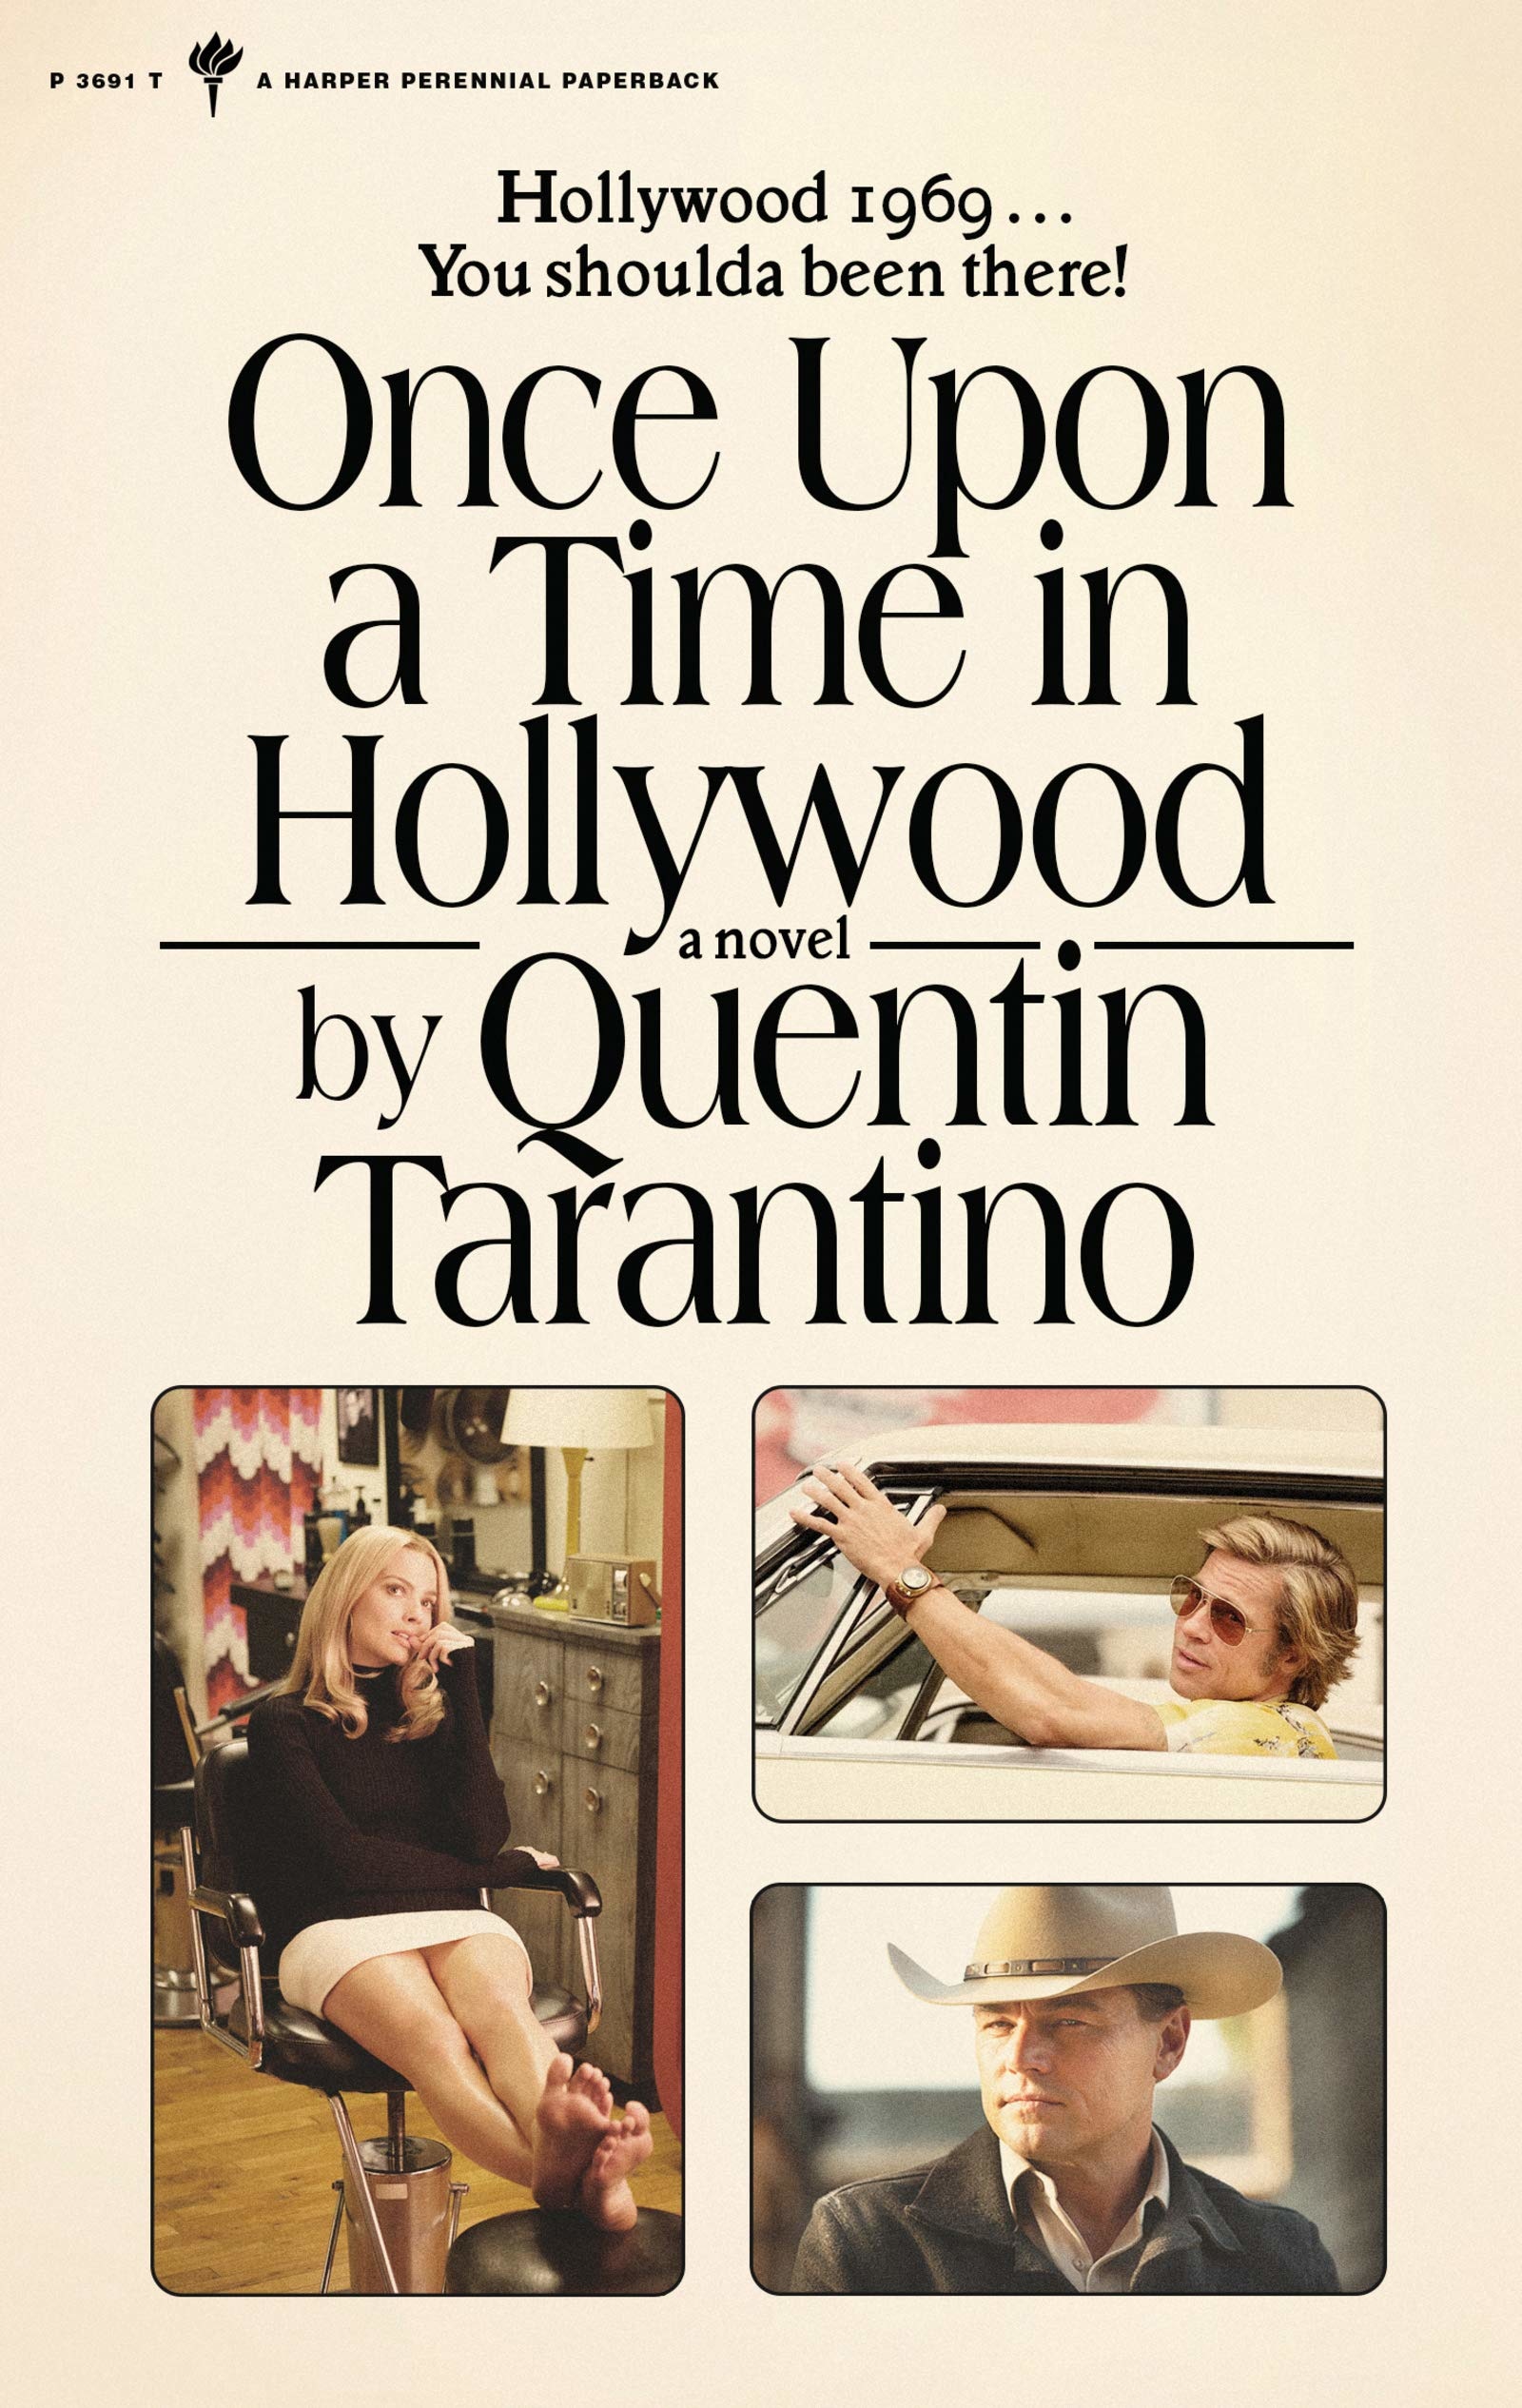 Book “Once Upon a Time in Hollywood” by Quentin Tarantino — June 29, 2021